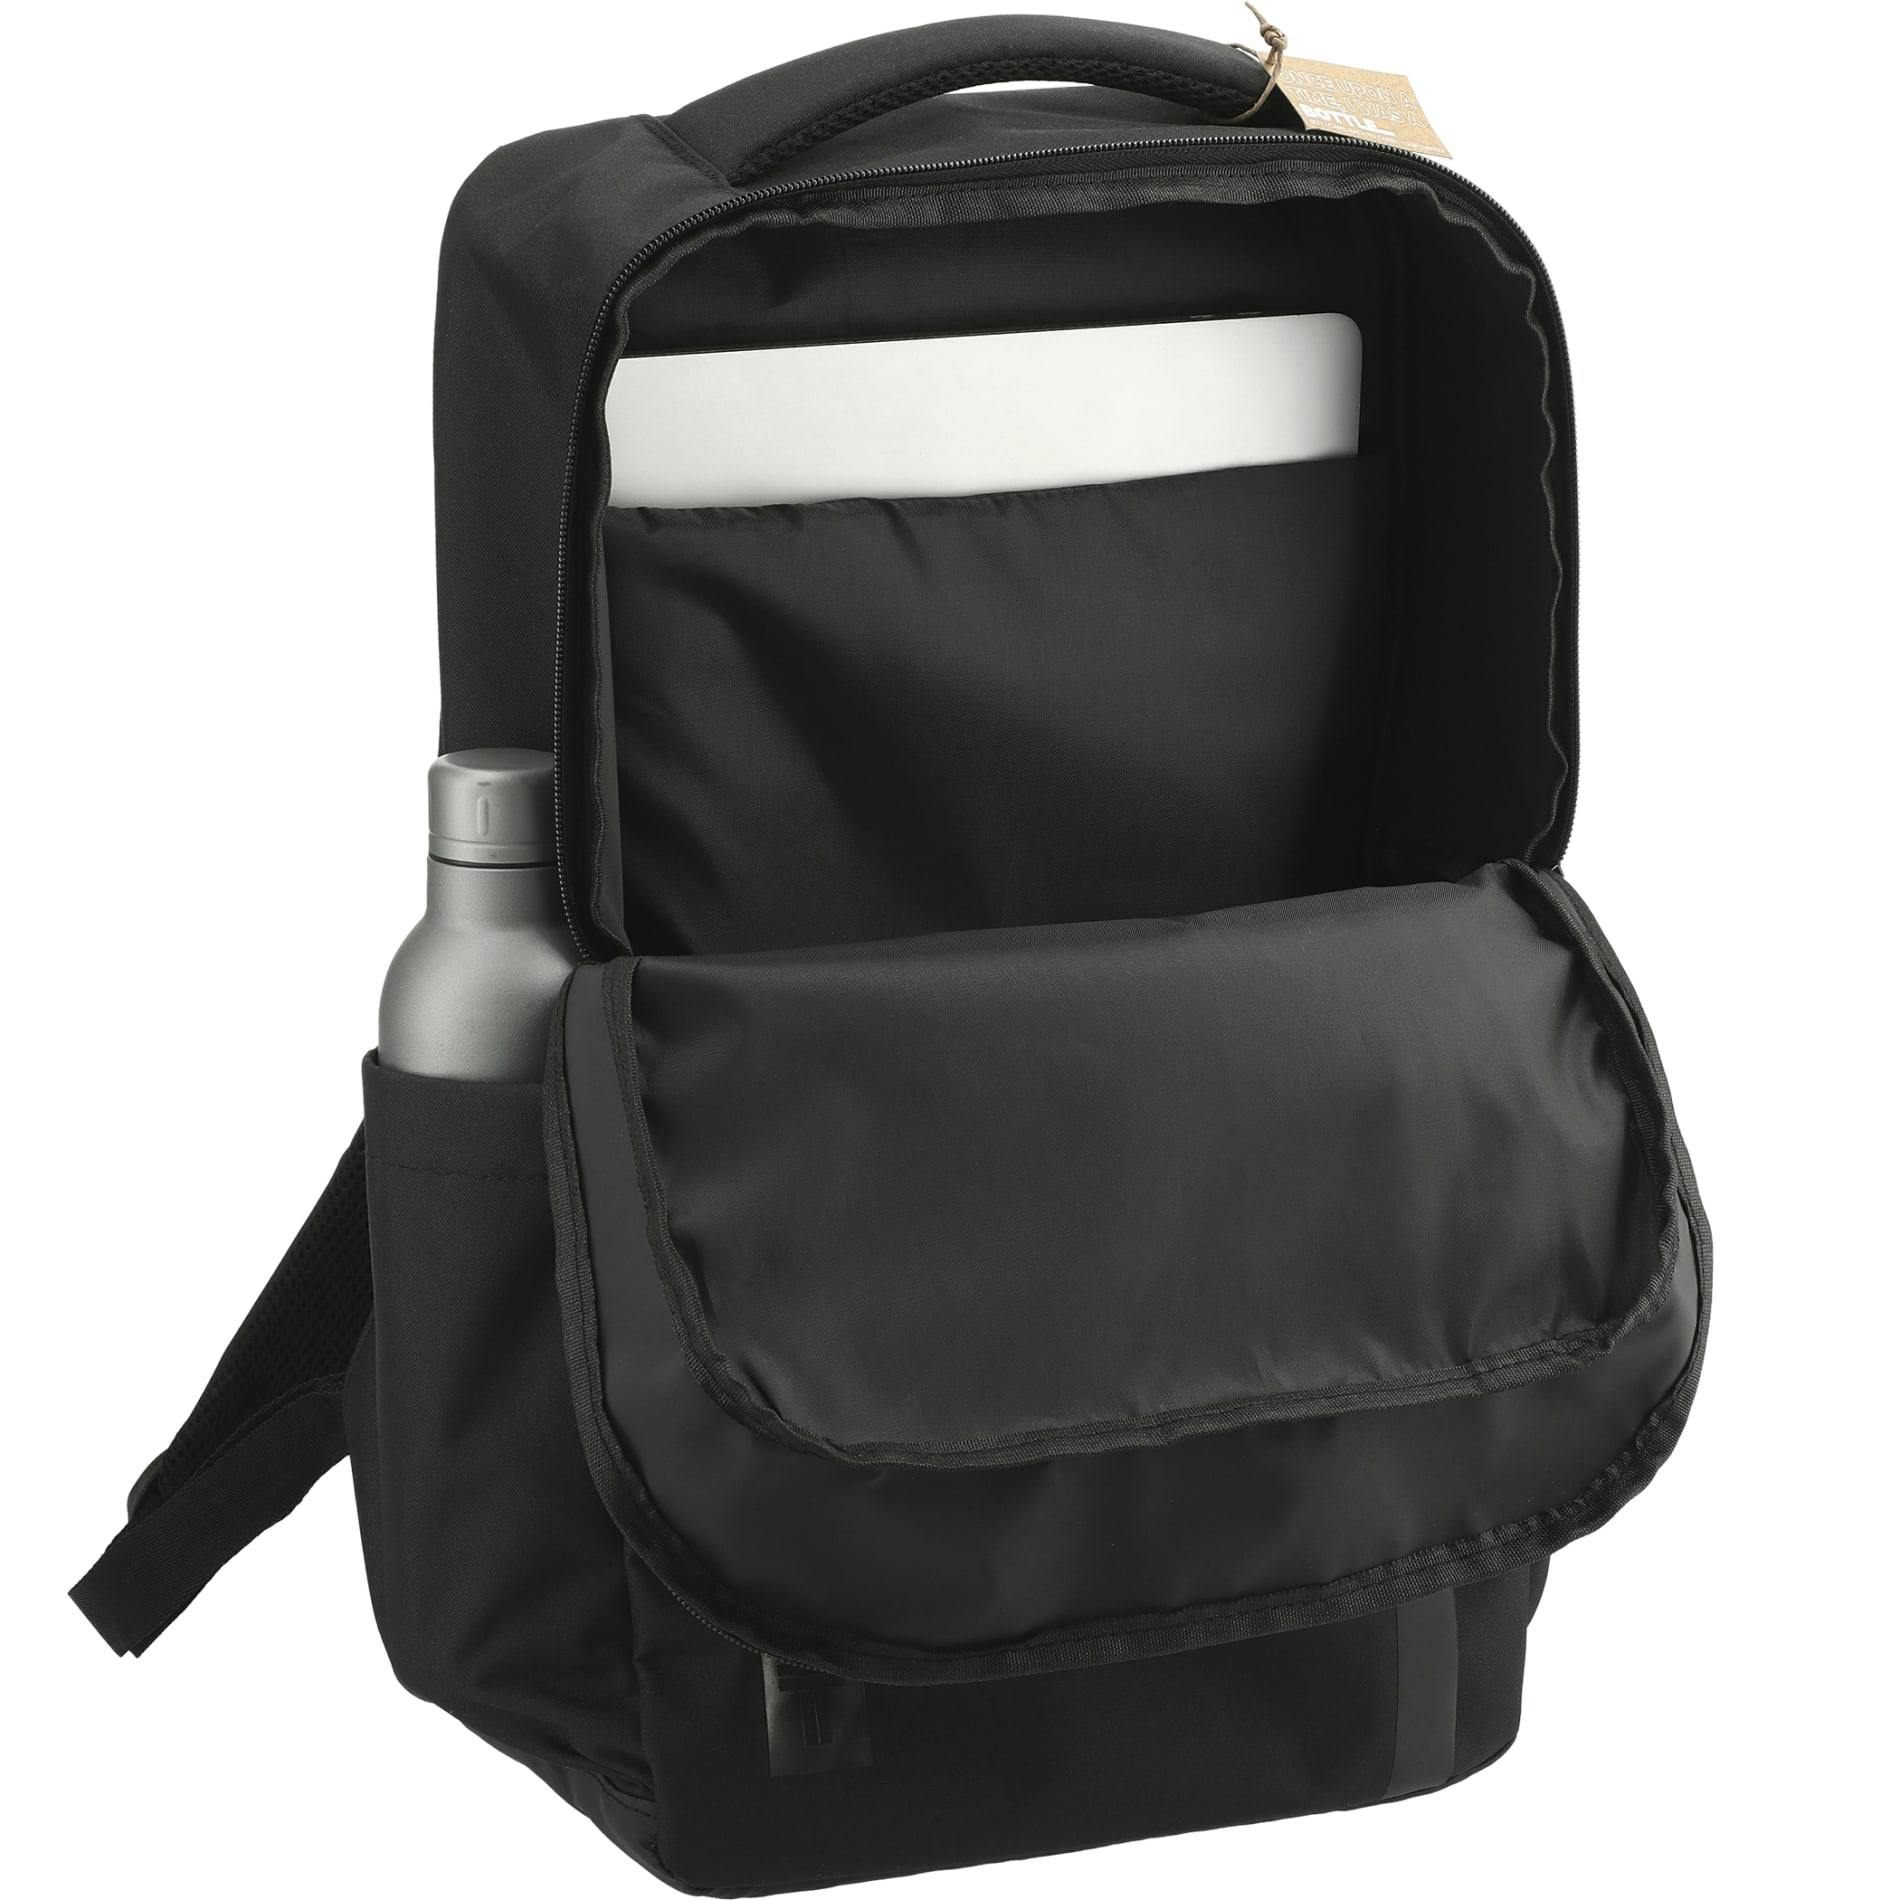 Tranzip Recycled 17" Computer Backpack - additional Image 5